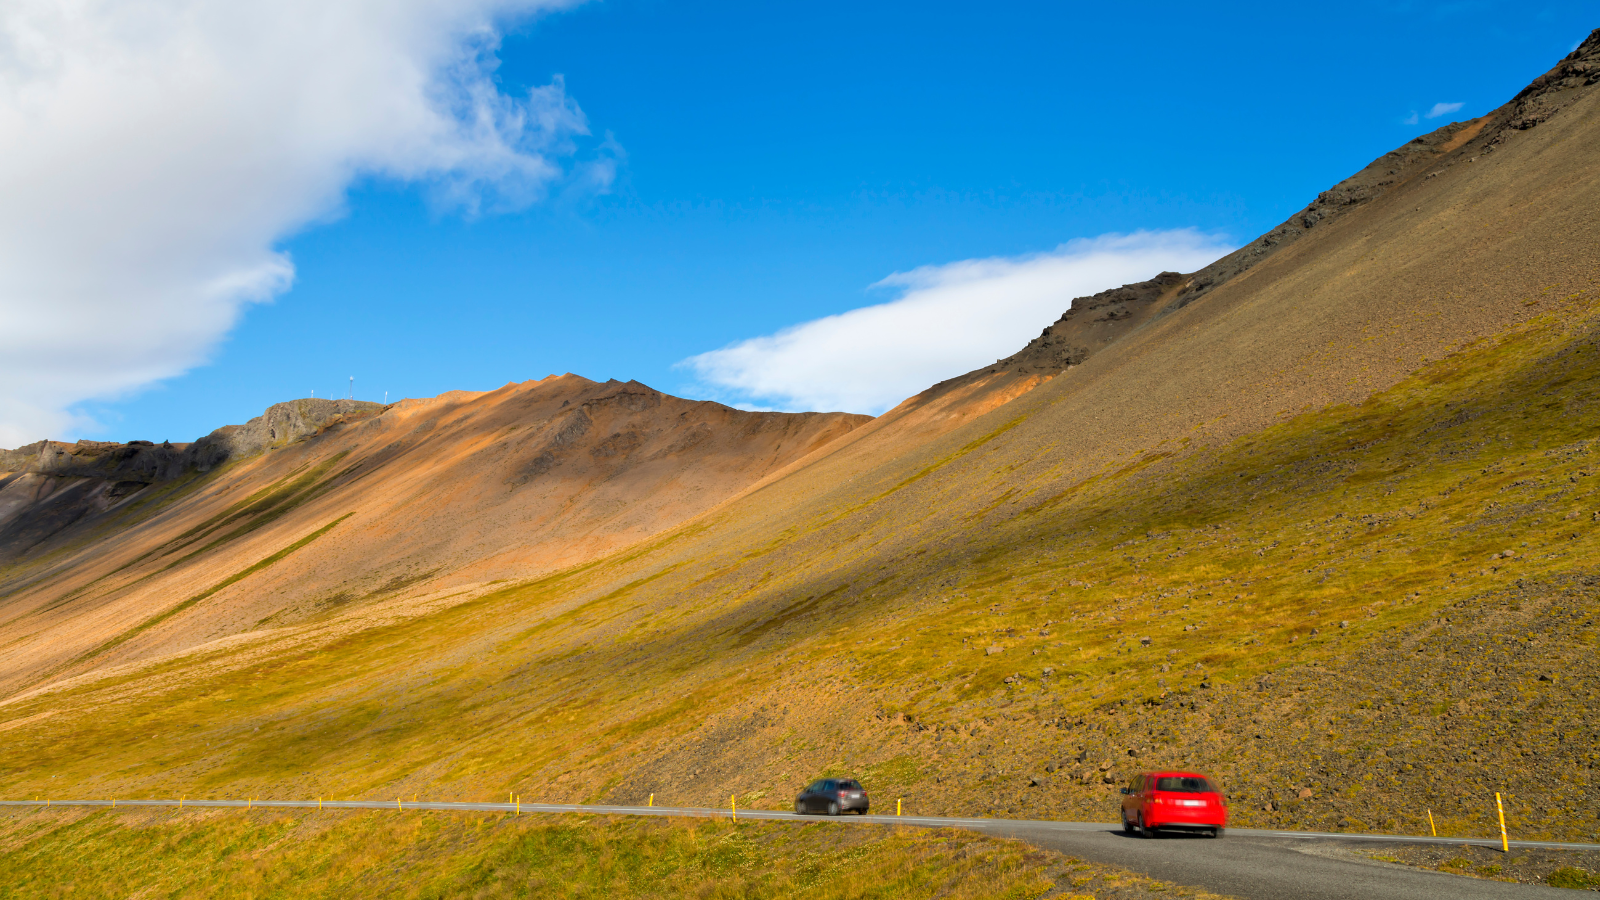 Blue skies in Iceland over two cards driving on a road beside a grassy peak.